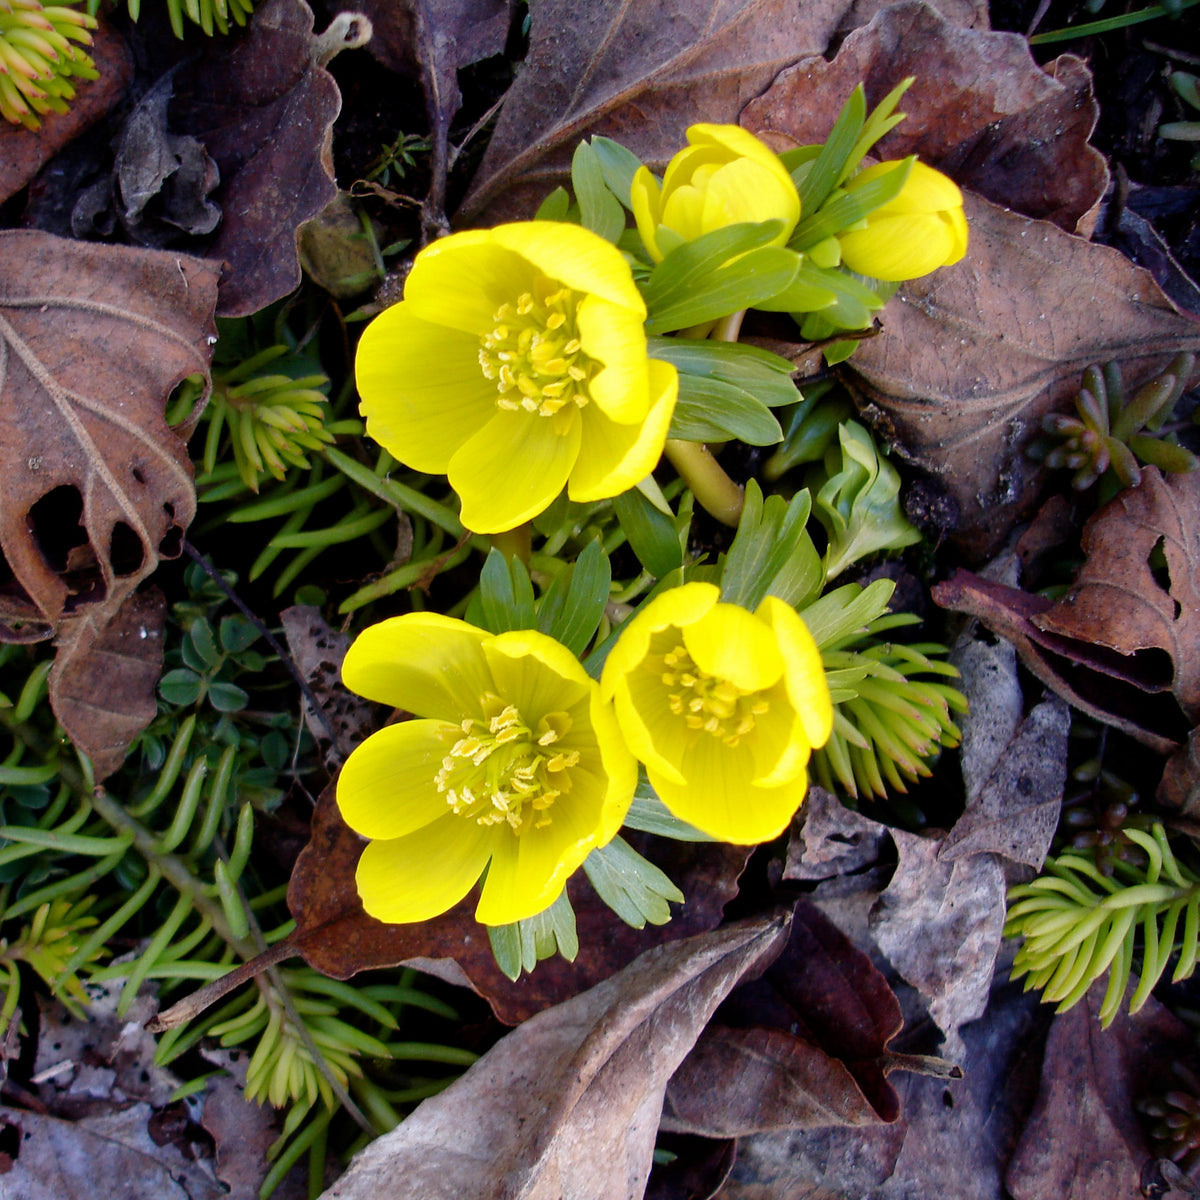 Winter Aconite: Add This Cheerful, Early-Spring Flower to Your Garden